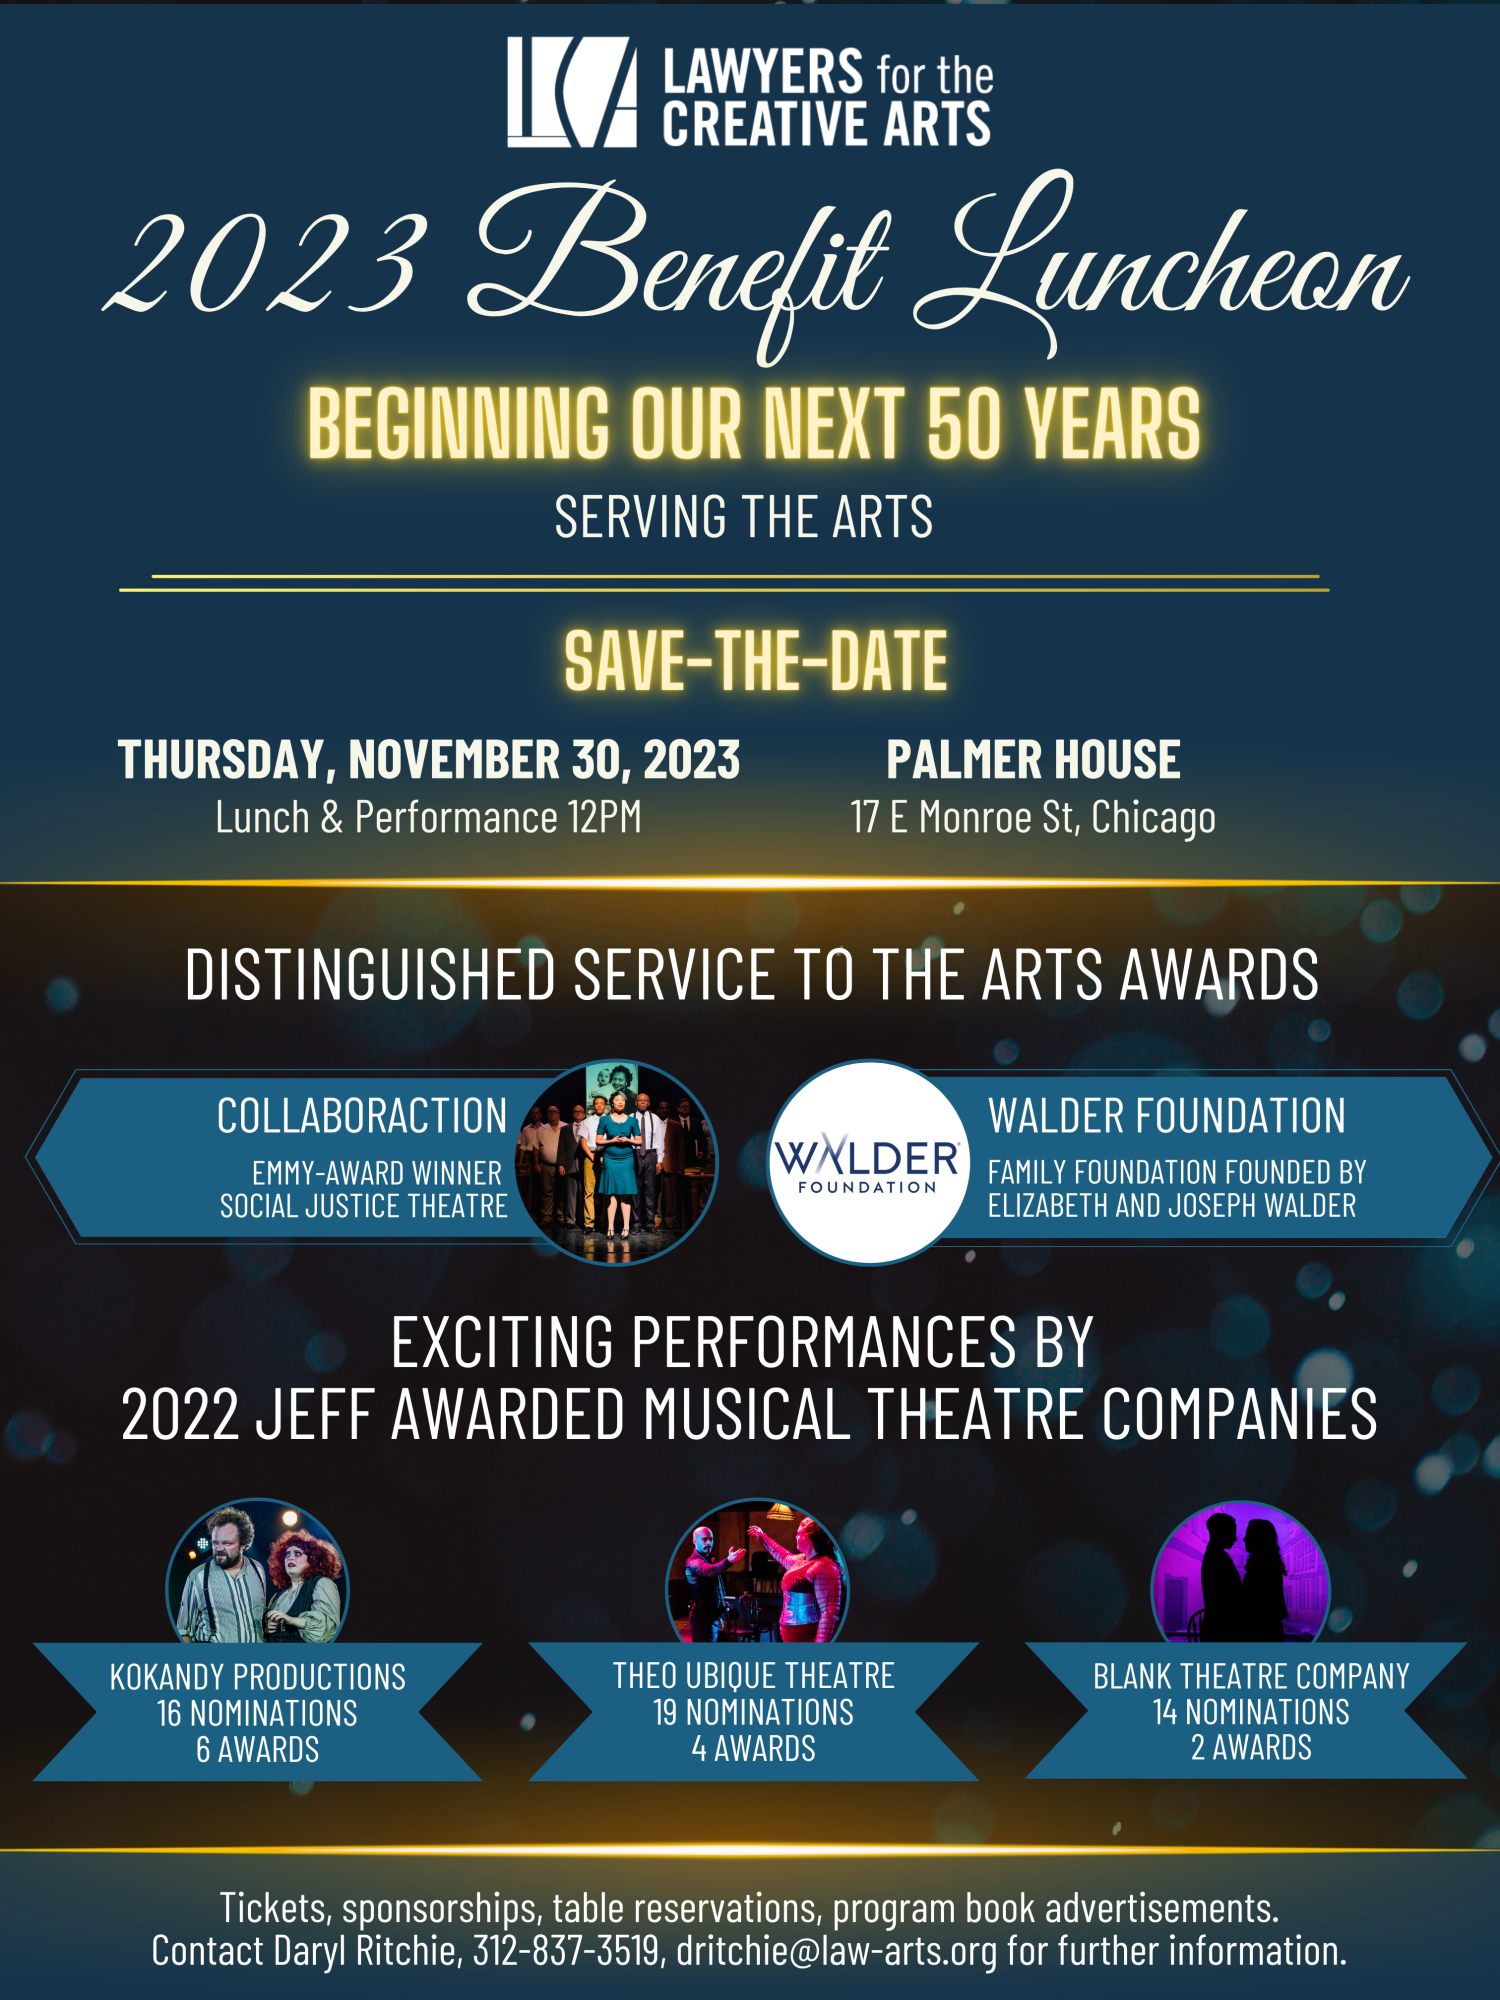 Save-the-Date Flyer. Thursday November 30, 2023 at the Palmer House.